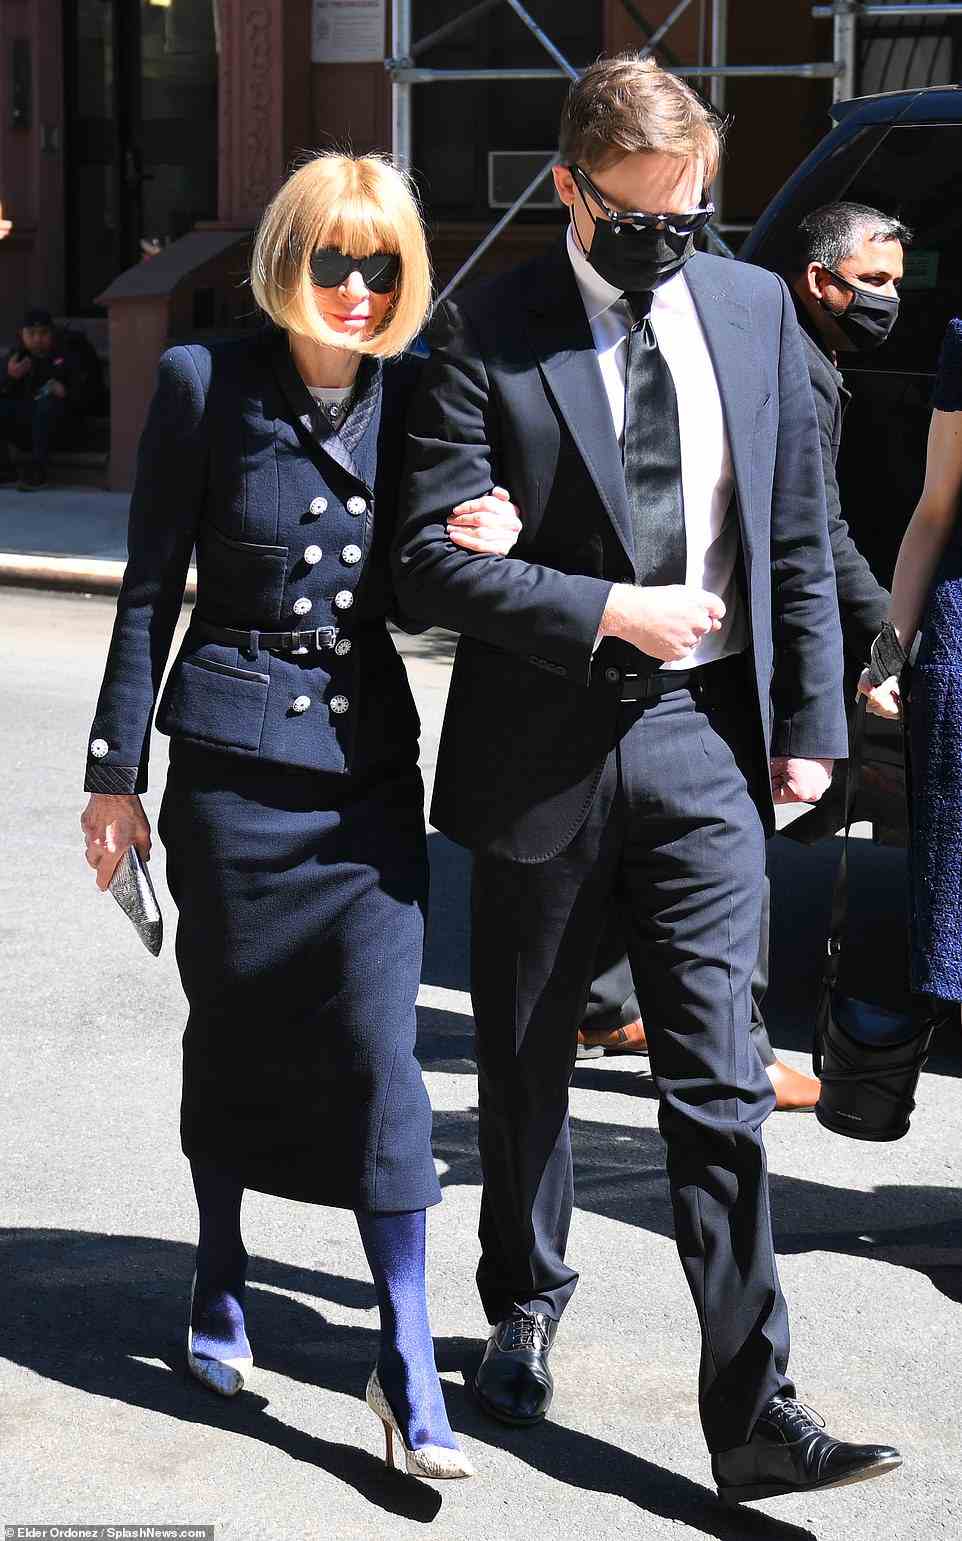 Vogue's Anna Wintour (who was accompanied by her son Charles Shaffer) was also in attendance at the memorial, which took place at the Abyssinian Baptist Church in Harlem, New York. She enjoyed a decades-long friendship with Talley, who famously accused her of dropping him from her inner circle because she believed him to be 'old, overweight, and uncool'